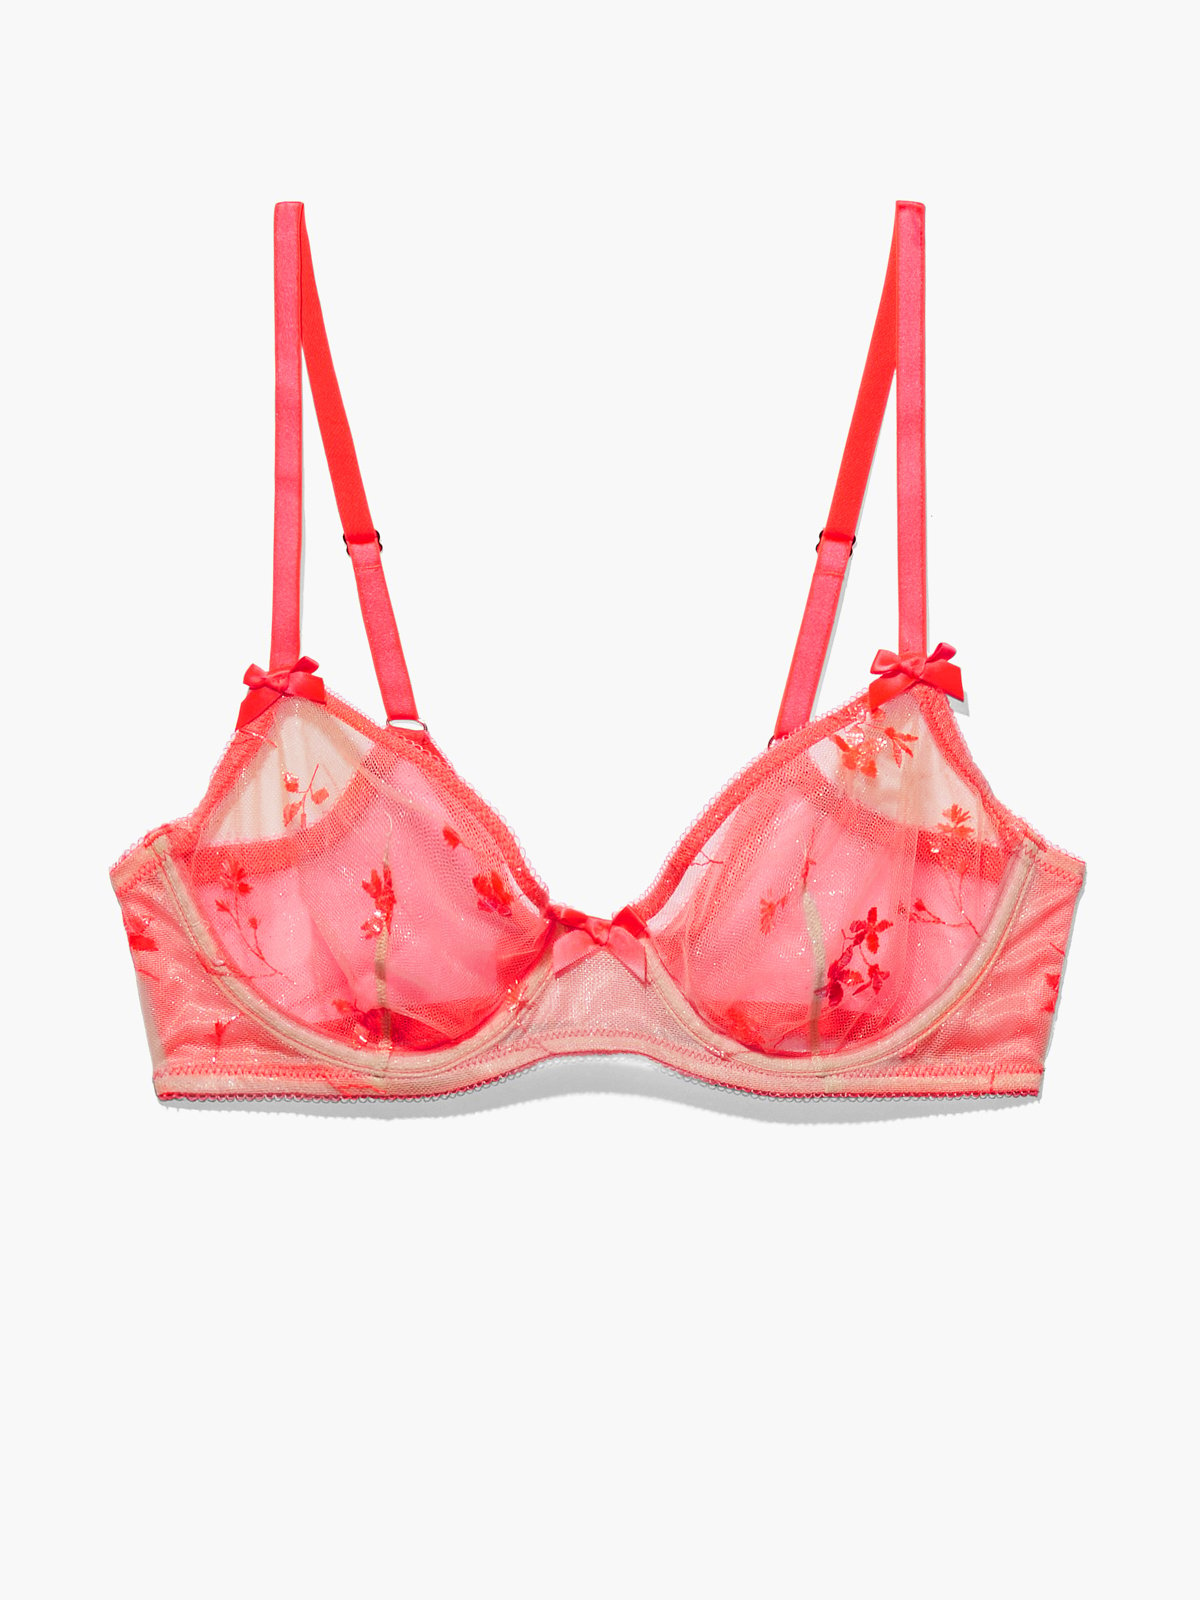 SAVAGE X FENTY, foiled springs embroidered unlined bra, size 36B in 2023